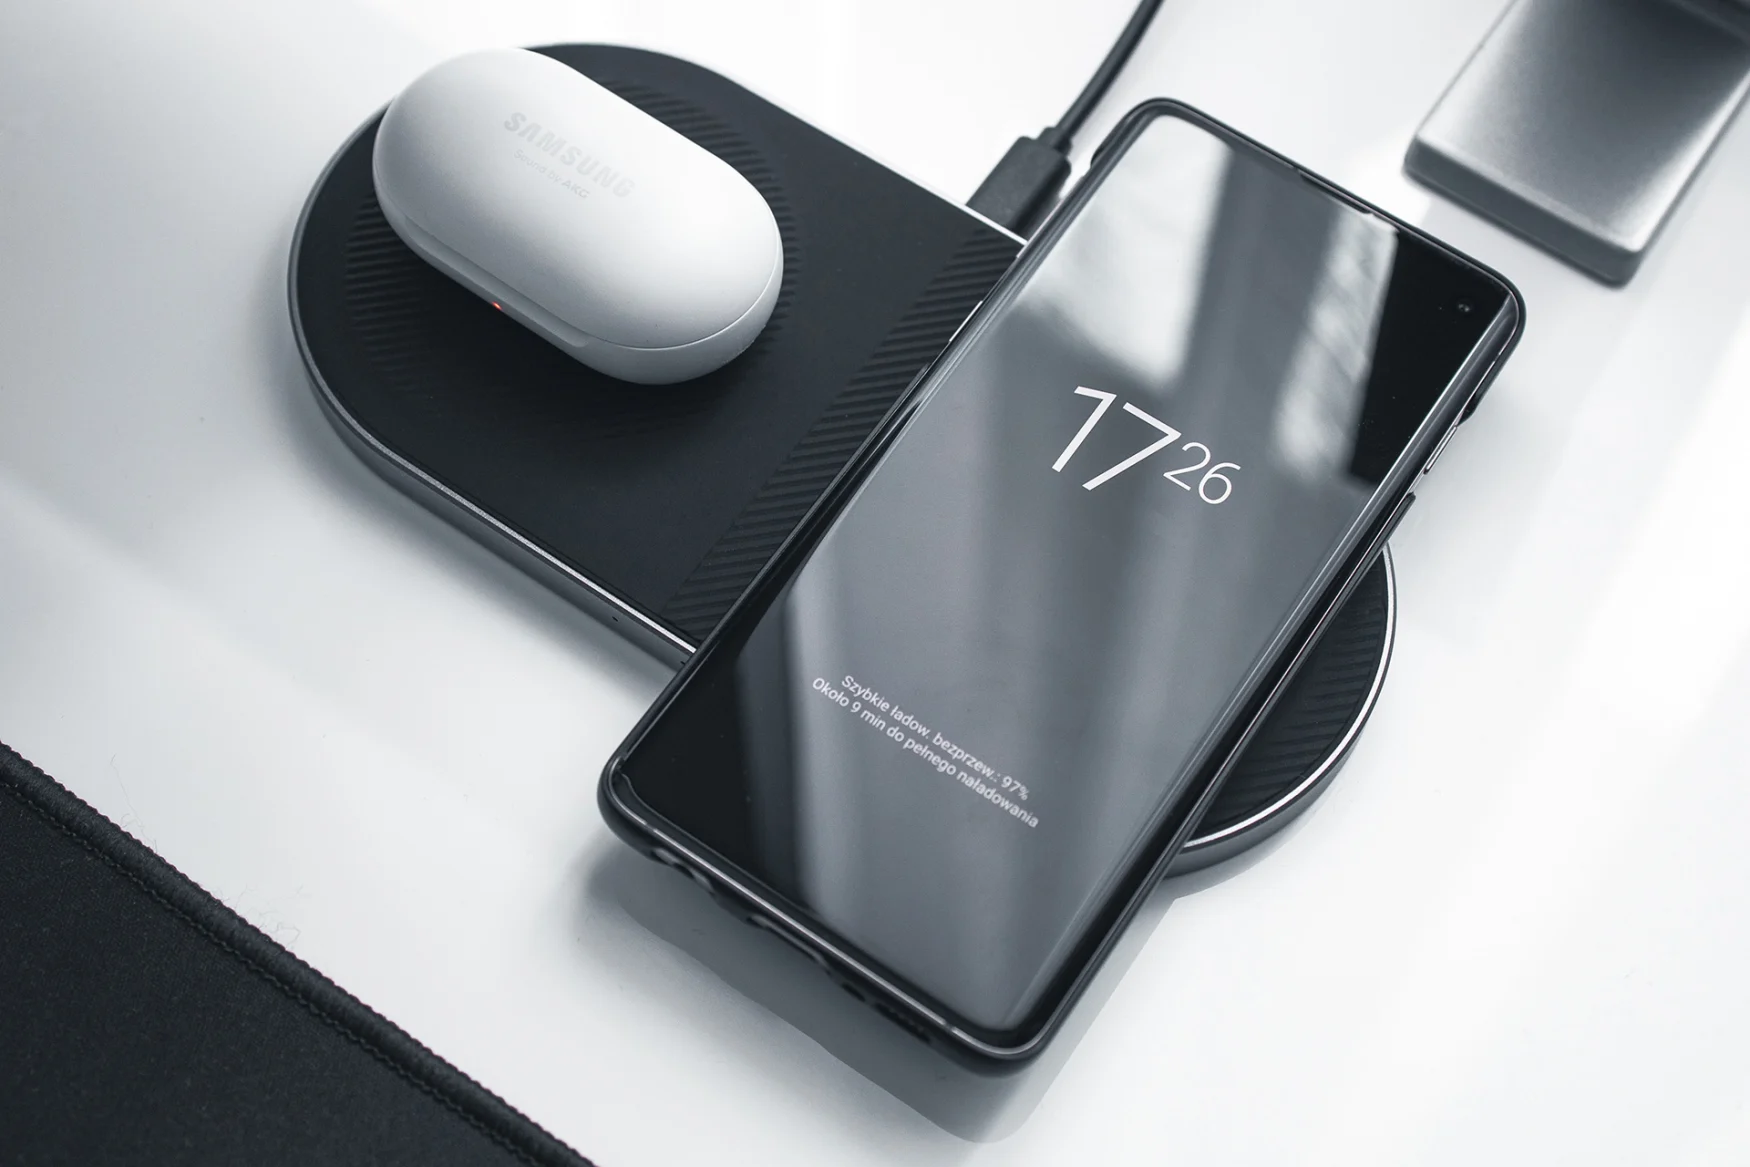 Multi-device wireless charger with Android phone and Samsung earbuds